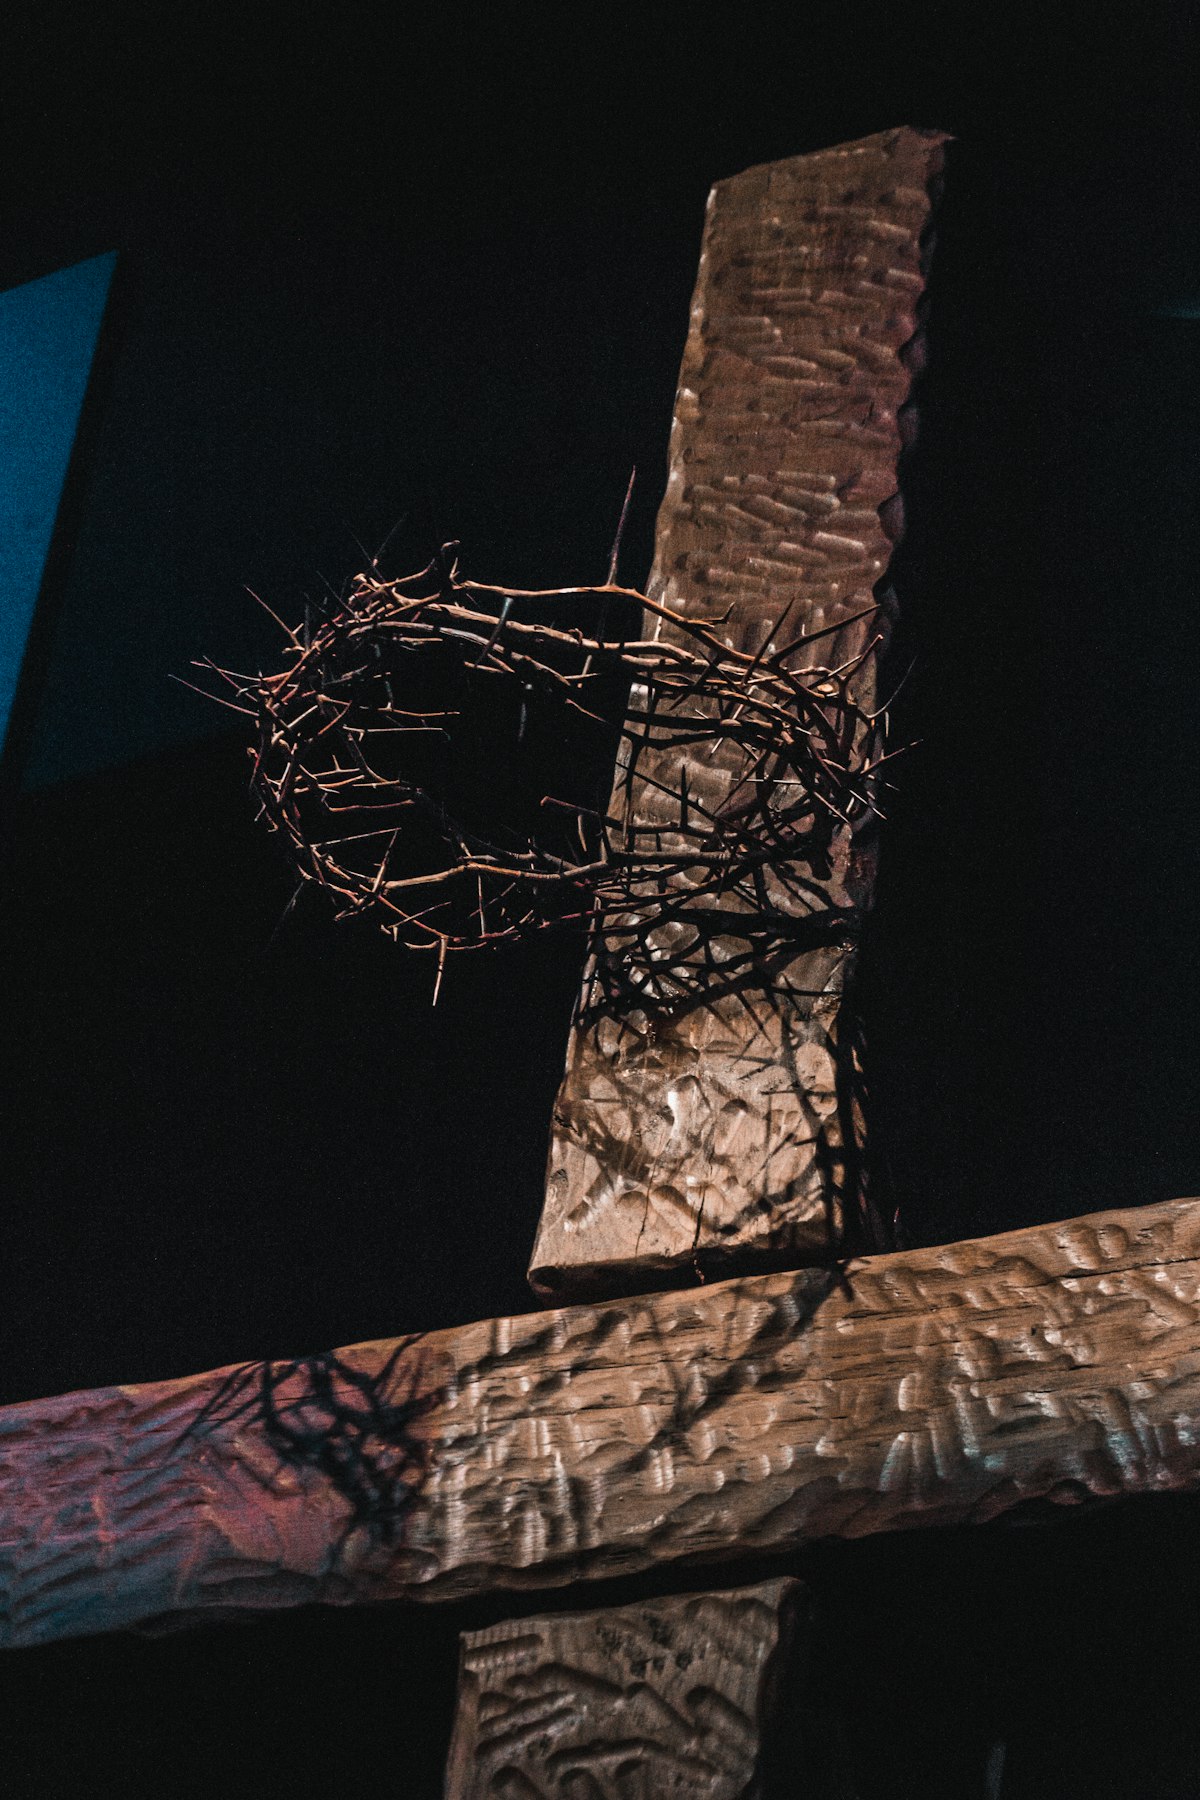 A Thorn from Christ’s Crown of Thorns Now an NFT